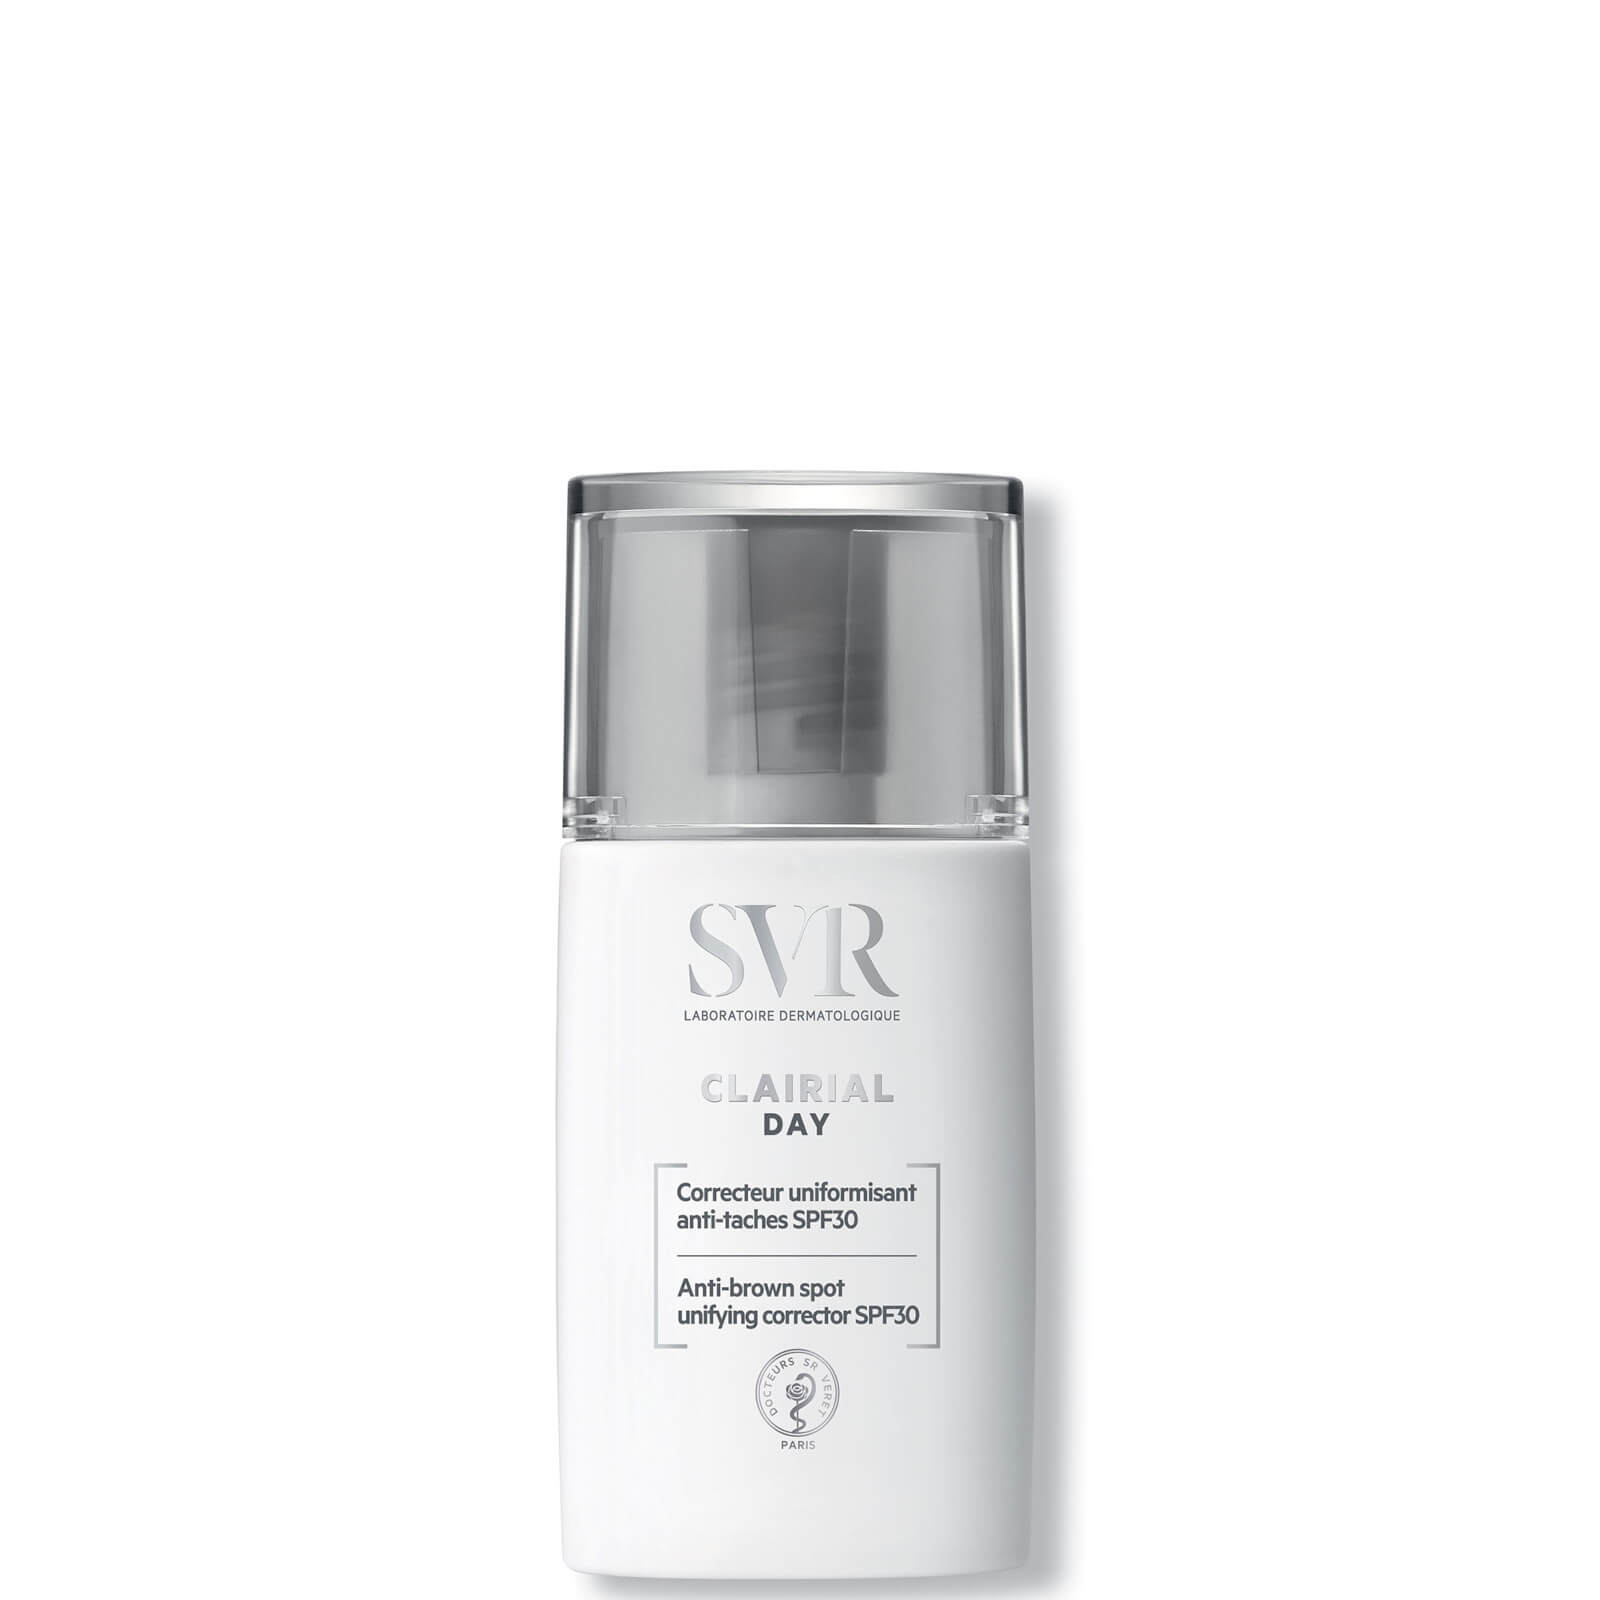 Photos - Sun Skin Care SVR Clarial Day SPF30 Pigmentation and Dark Spot Correction and Protection